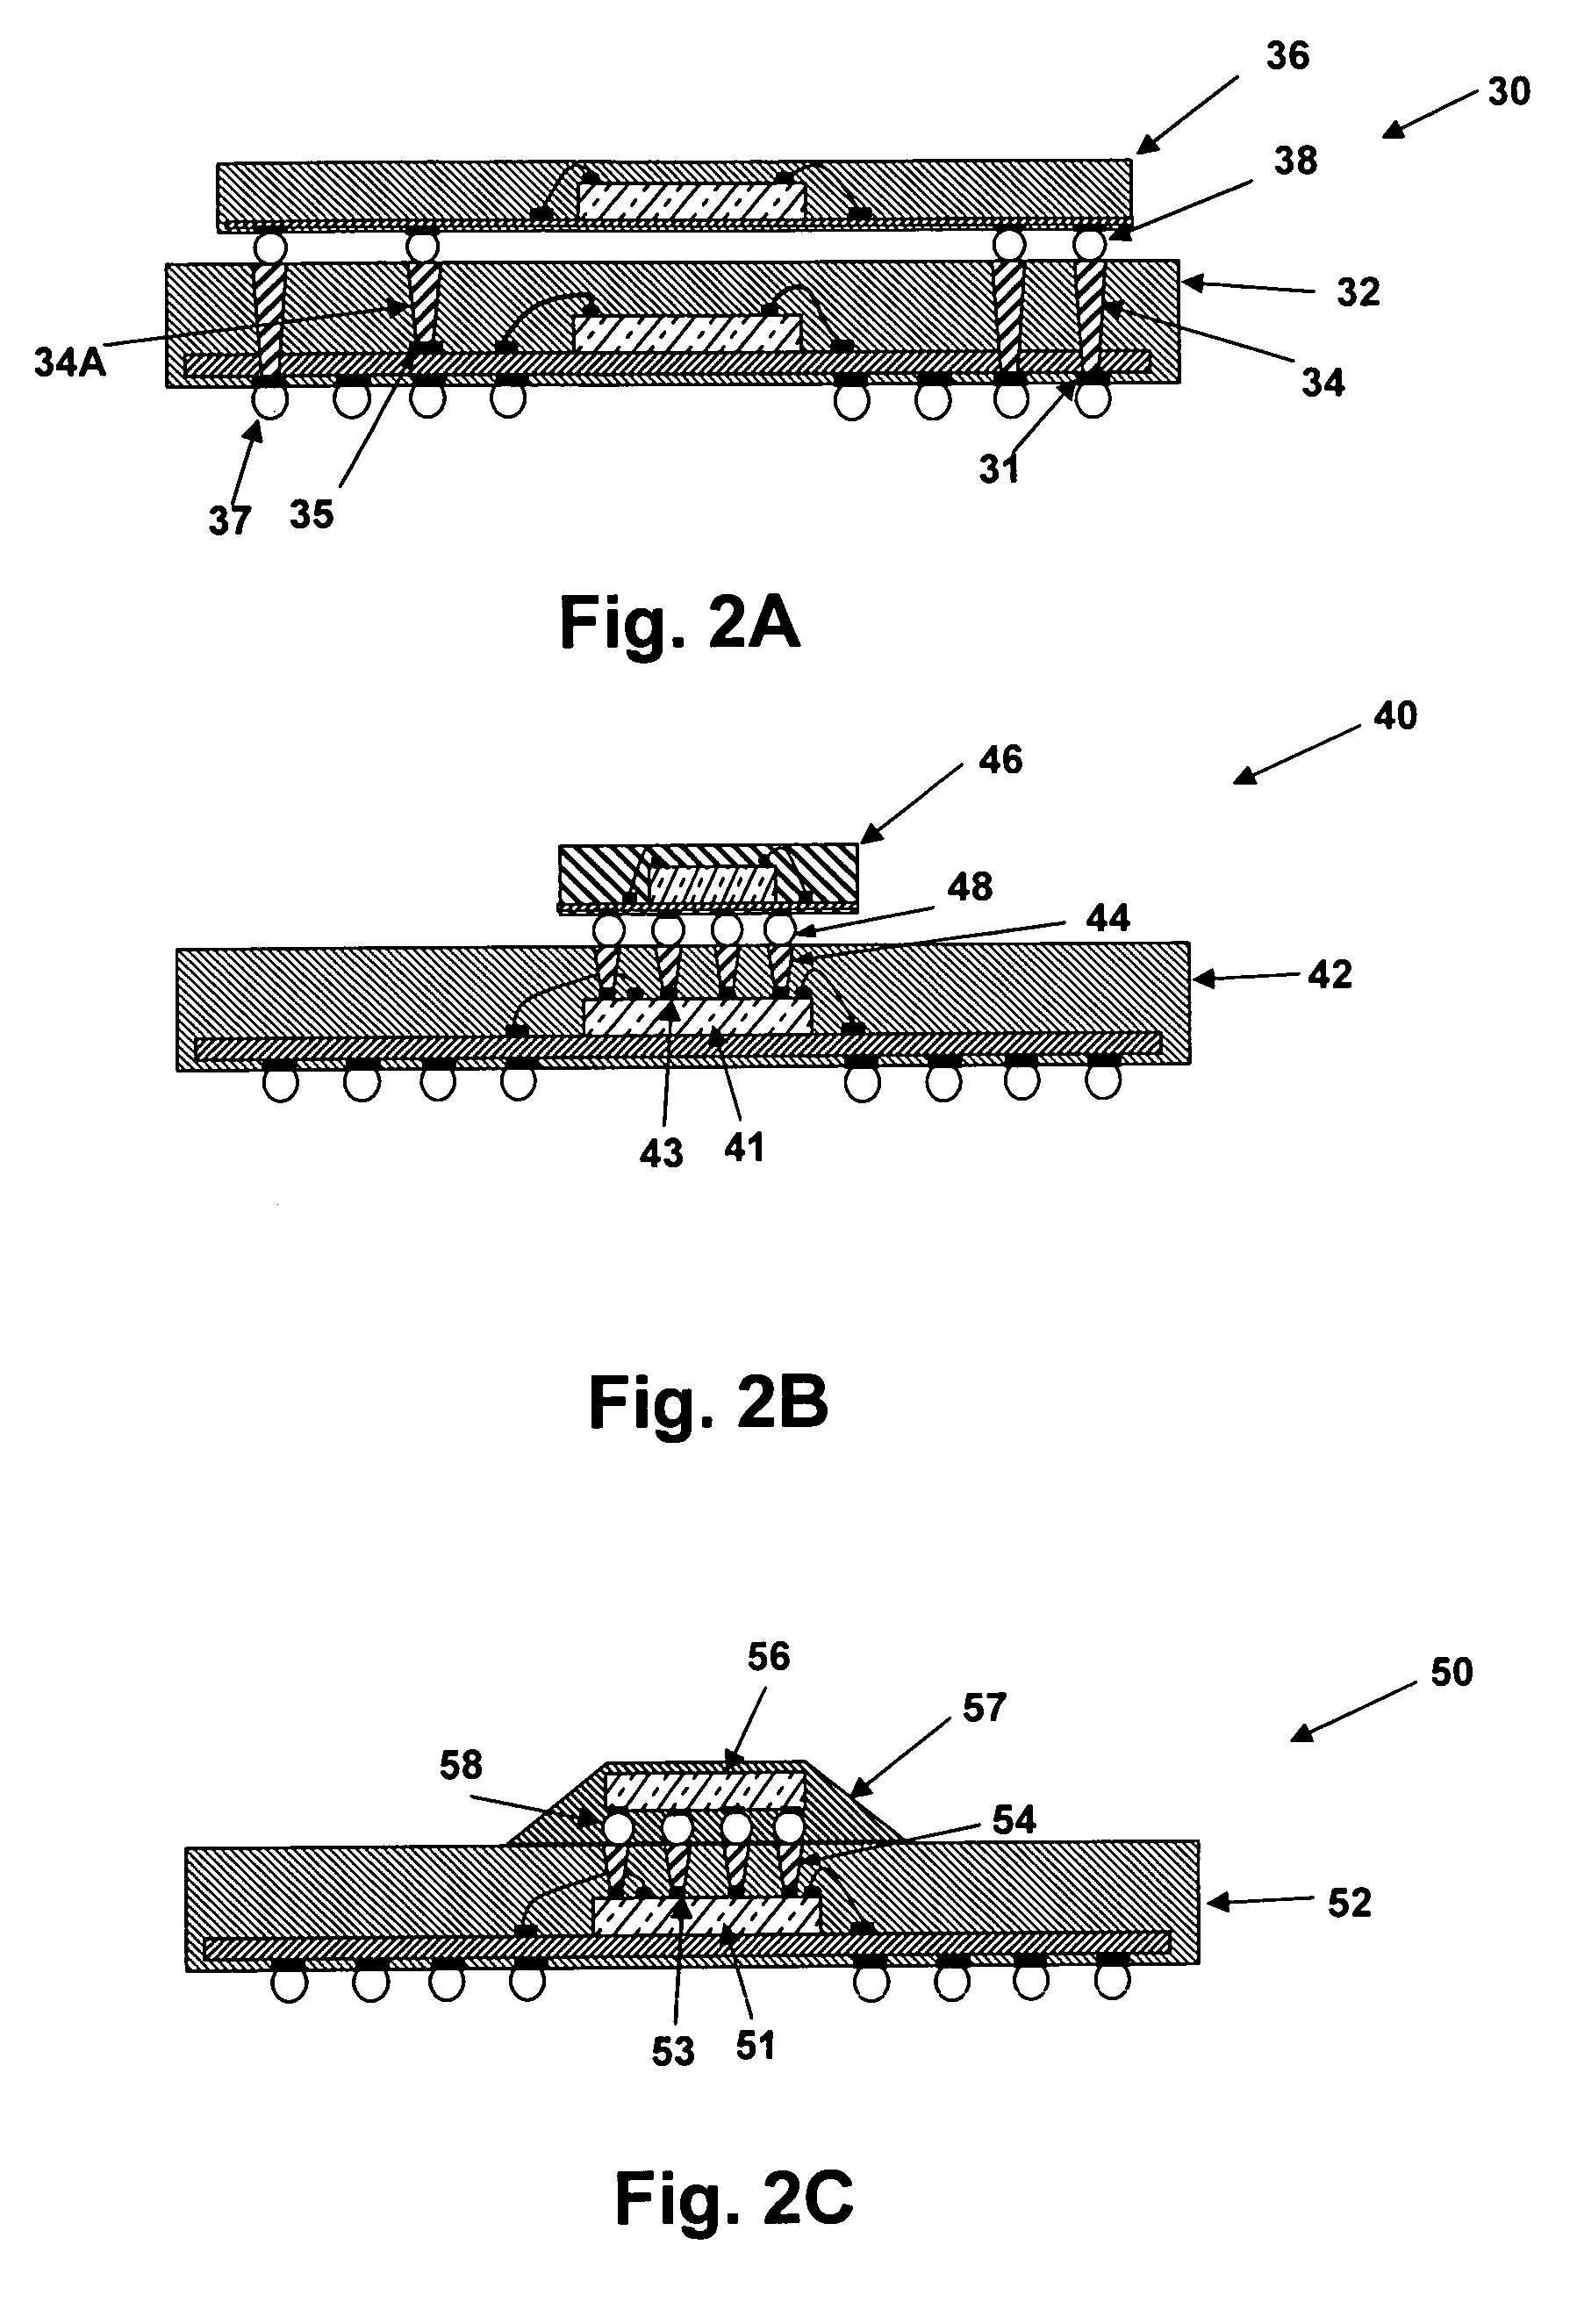 Method of manufacturing a semiconductor package